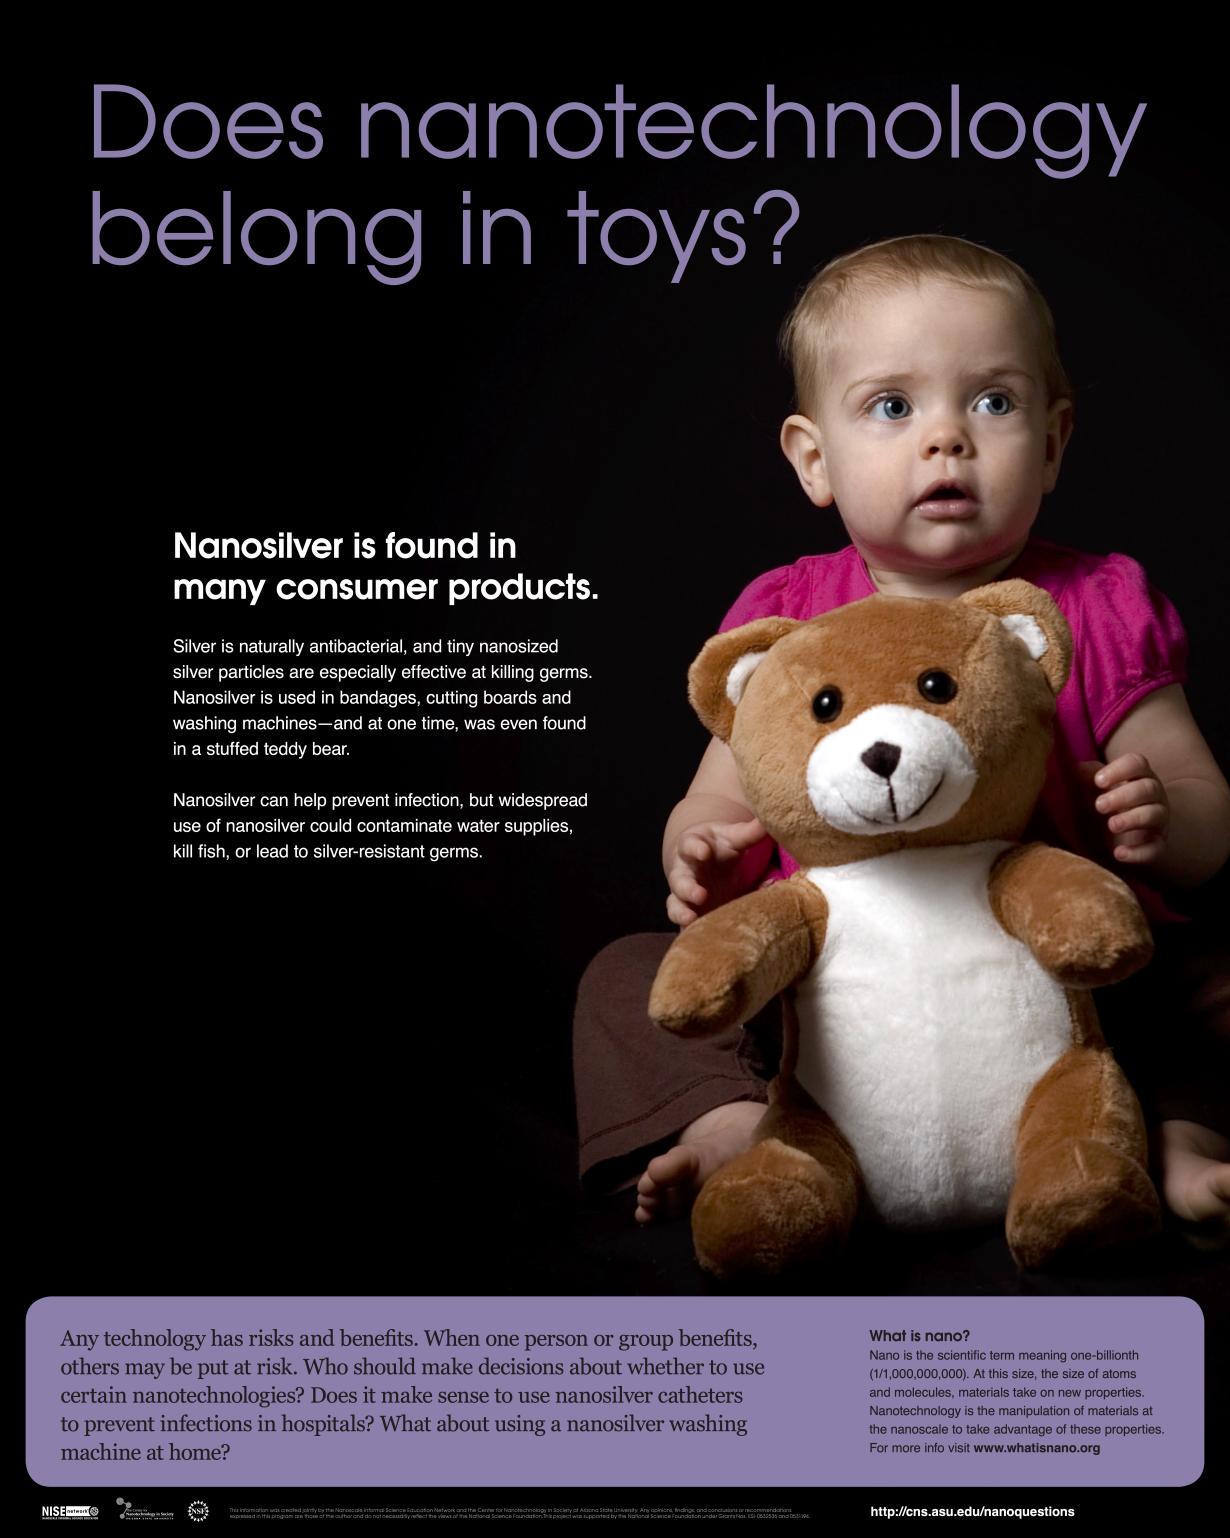 Nanotechnology and society poster  - Does nanotechnology belong in toys showing a child holding Benny the bear